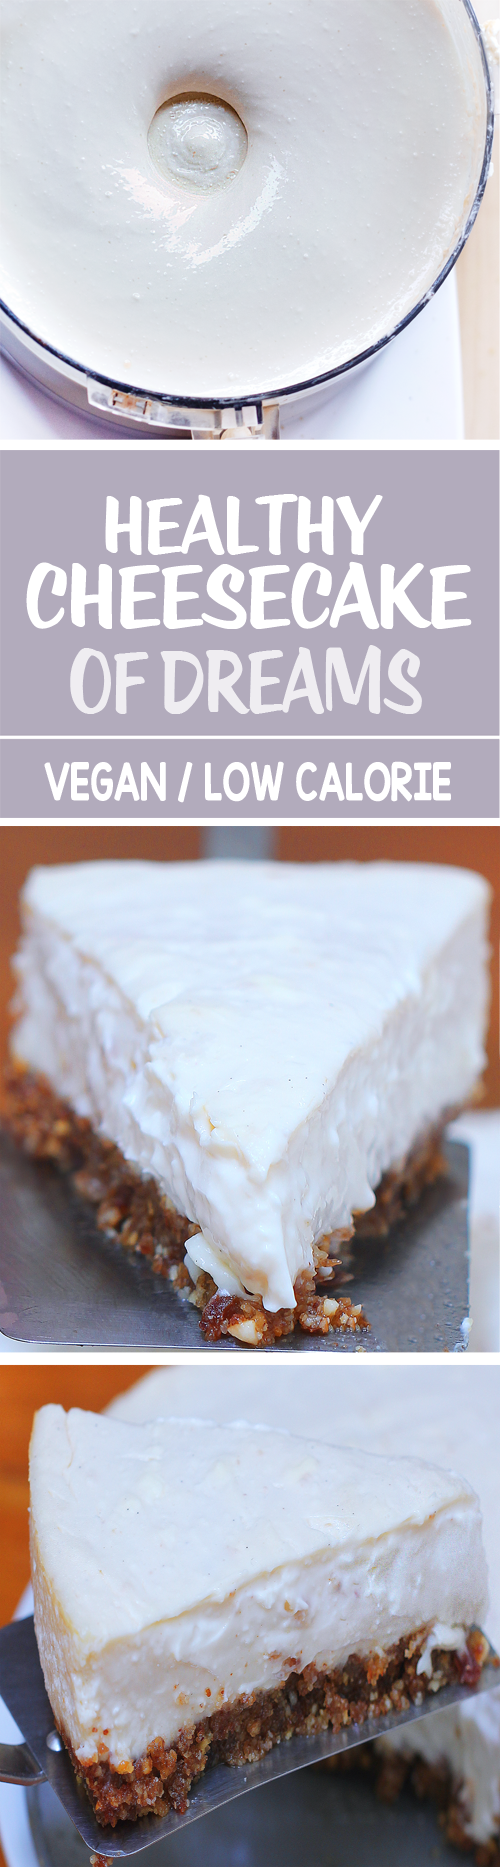 We liked this even better than Cheesecake Factory cheesecake and didn't even care that it was a healthy cheesecake recipe!